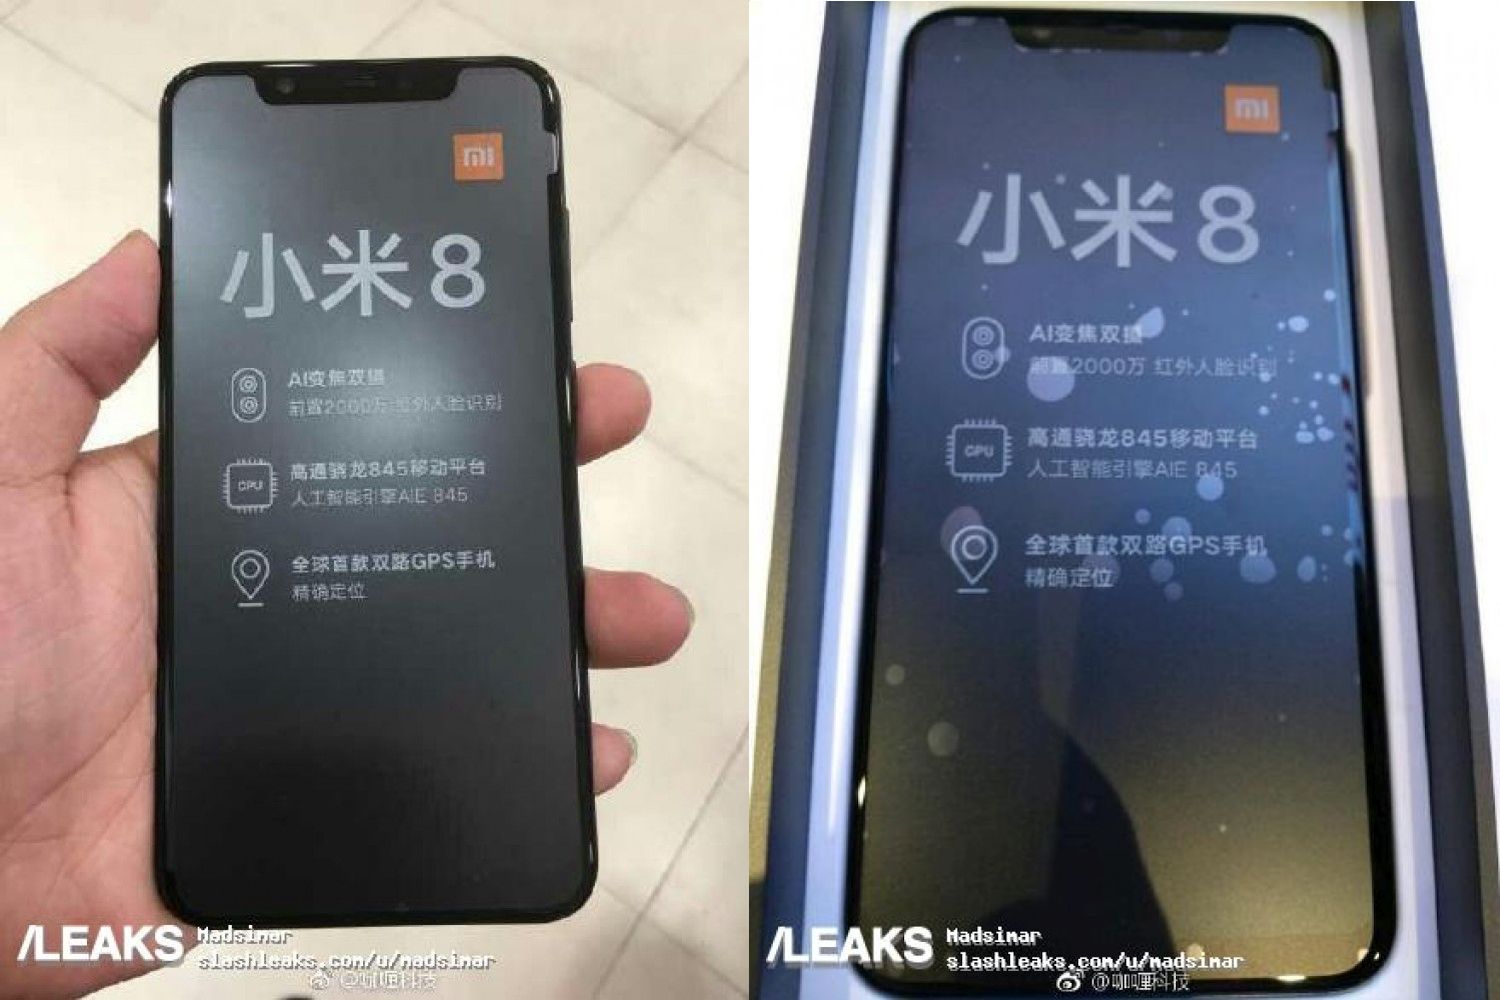 Mi 8 Hands-On Emerge; Debut as World's First Phone with GPS Module - Gizmochina